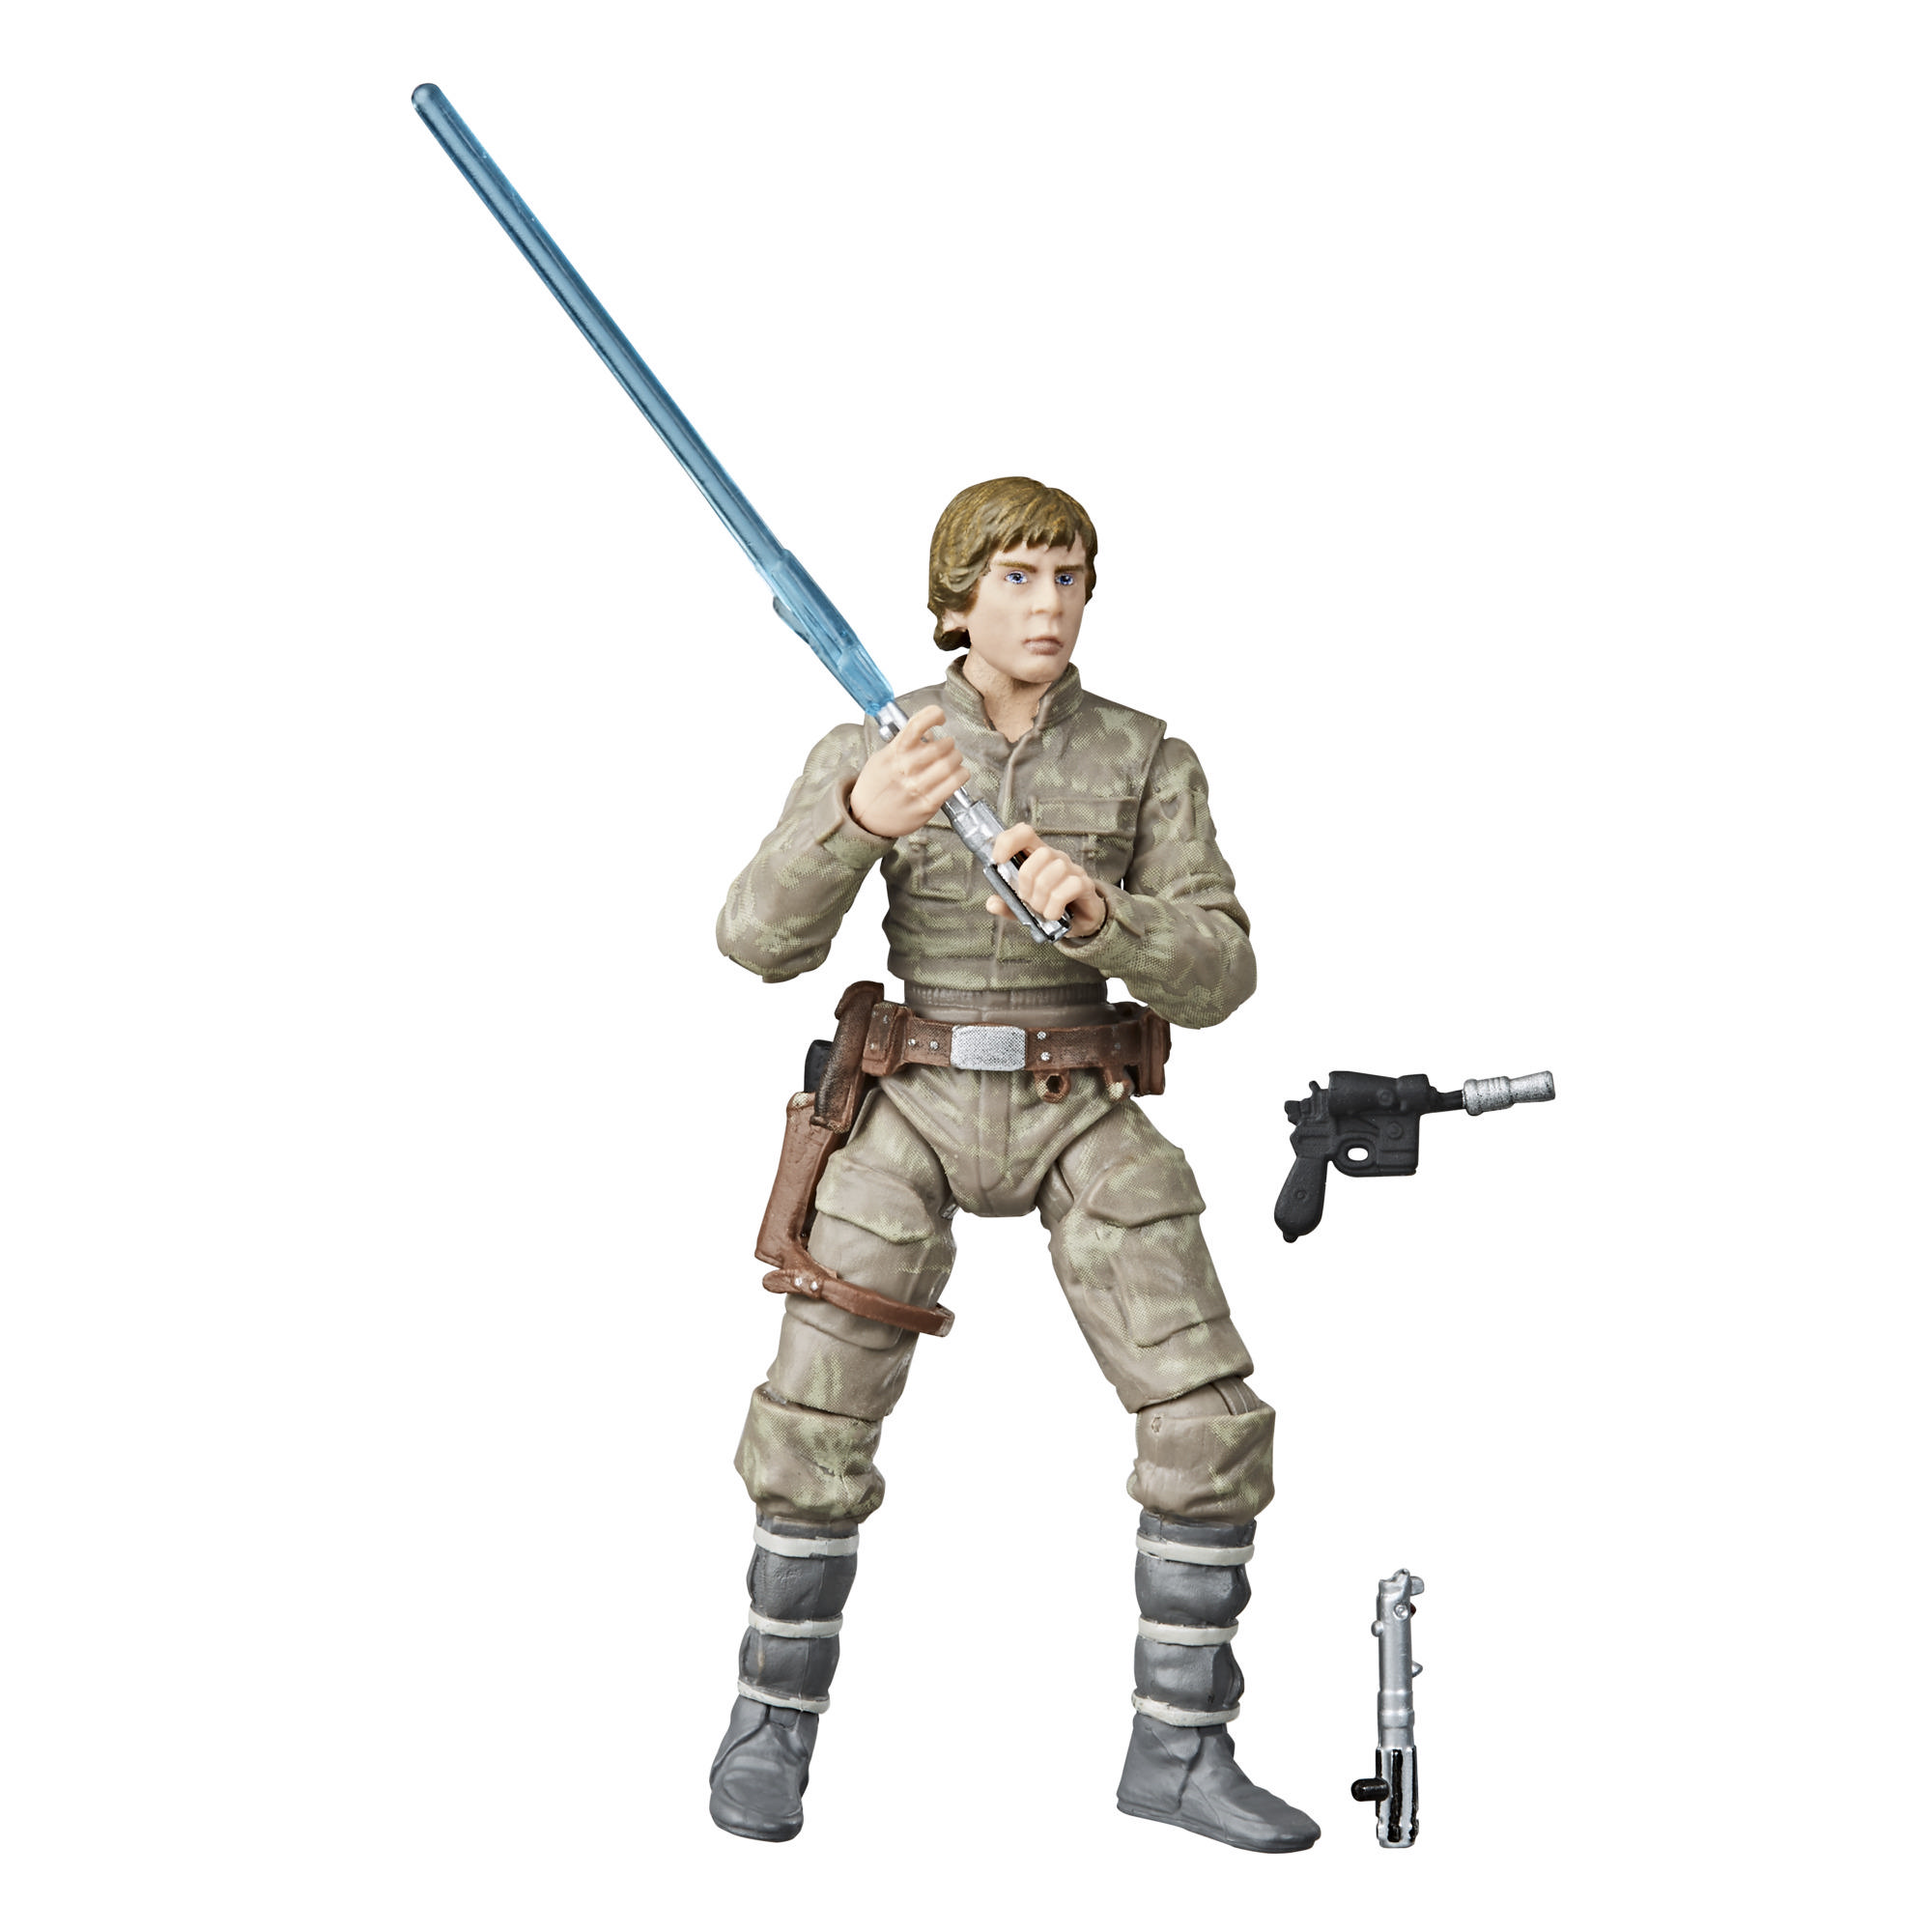 Star Wars The Vintage Collection Luke Skywalker (Bespin) Toy, 3.75-inch Scale Star Wars: The Empire Strikes Back Figure